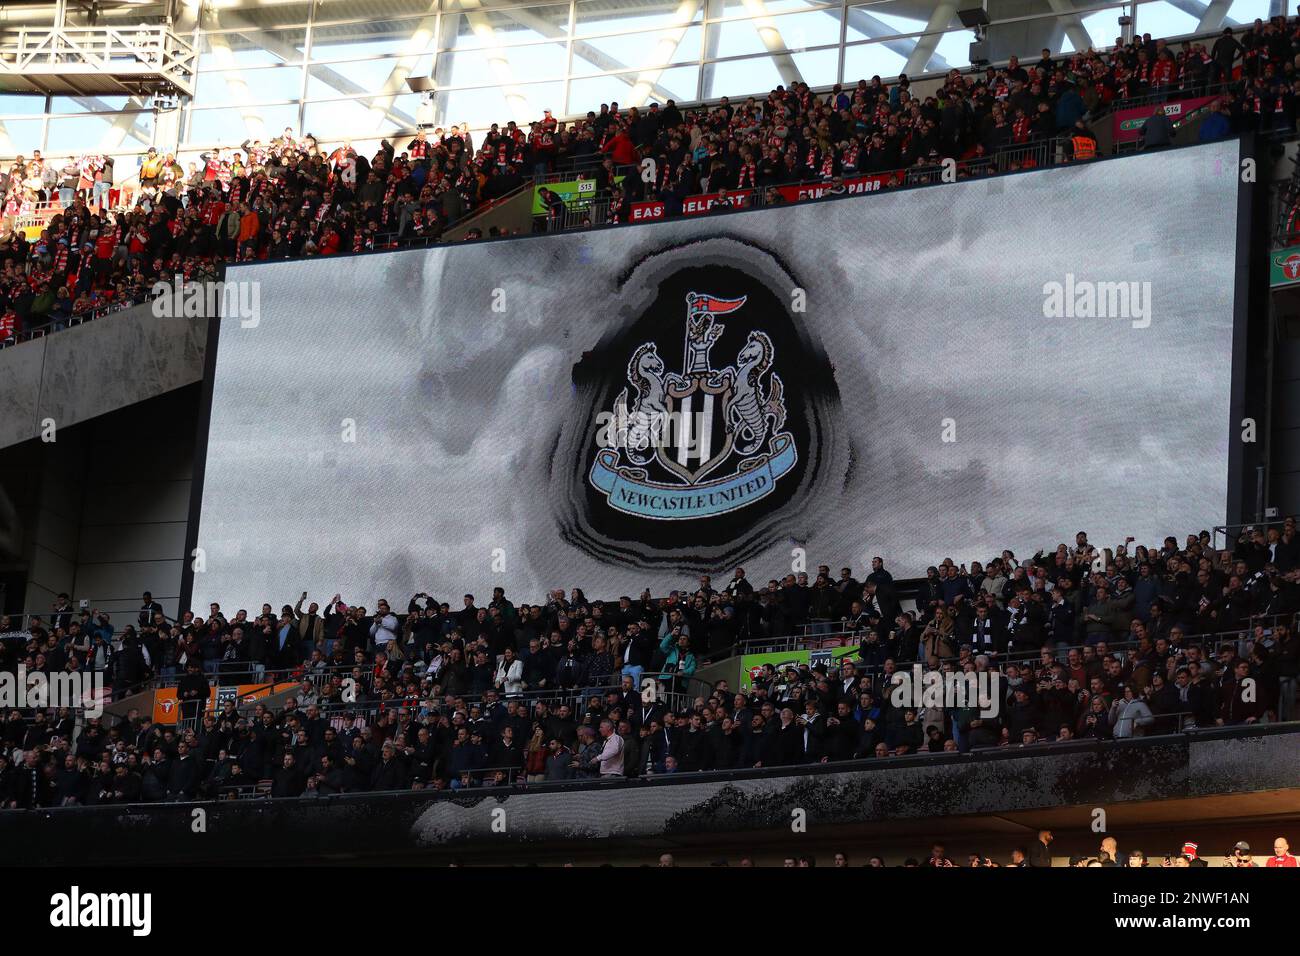 London, UK. 26th Feb, 2023. A general view of the Newcastle Utd football club crest. Carabao Cup final 2023, Manchester Utd v Newcastle Utd at Wembley Stadium in London on Sunday 26th February 2023. Editorial use only. pic by Andrew Orchard/Andrew Orchard sports photography/Alamy Live News Credit: Andrew Orchard sports photography/Alamy Live News Stock Photo